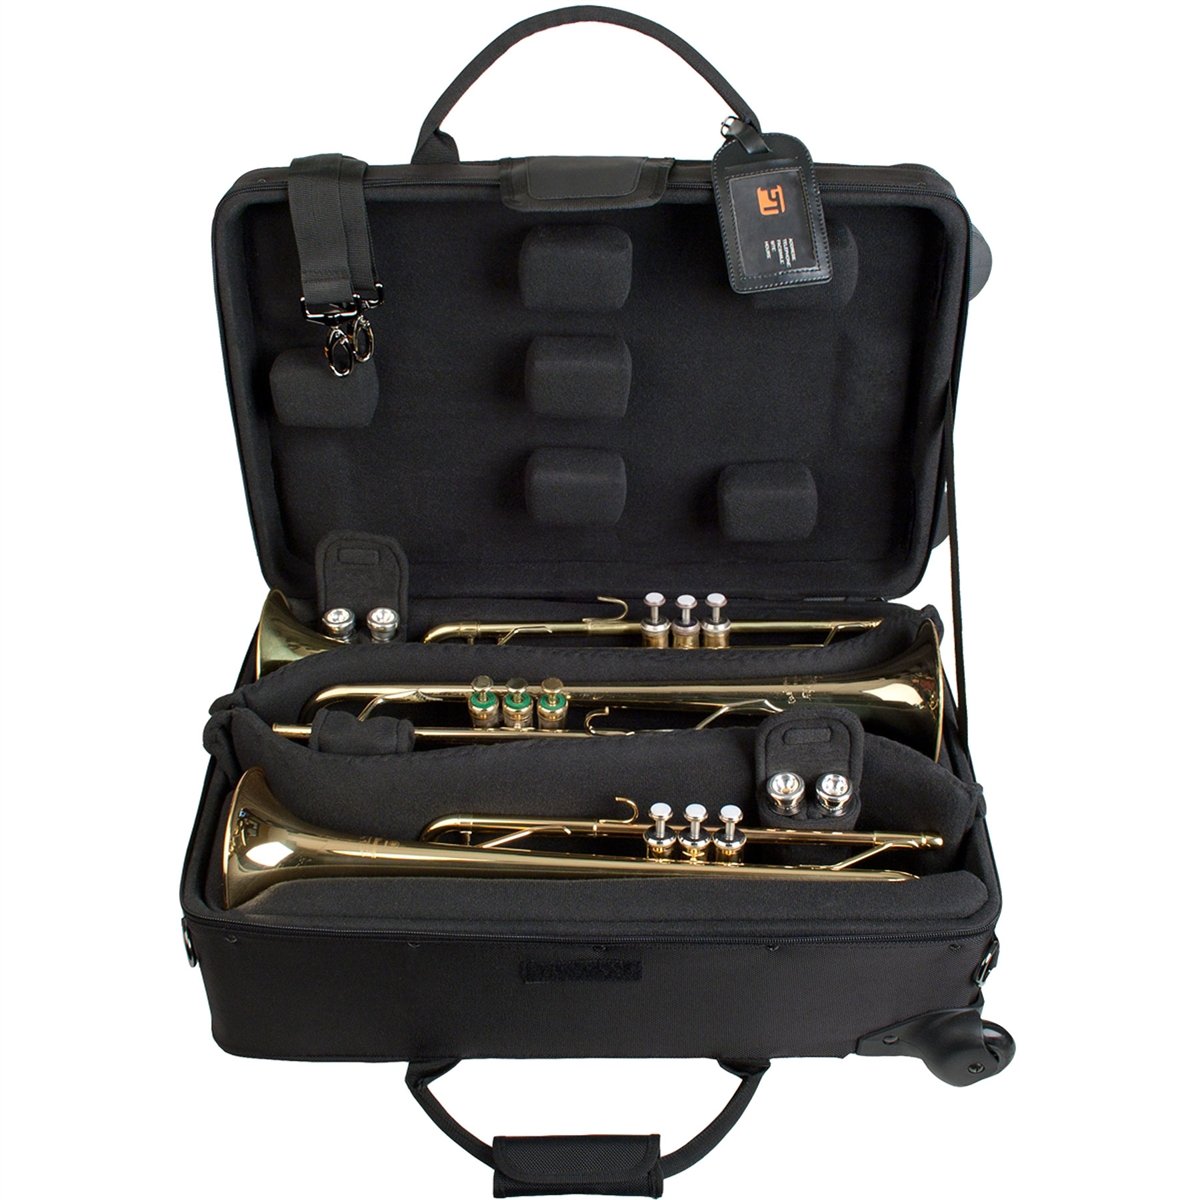 Protec - Triple Horn IPAC Case with Wheels (Trumpet/Flugelhorn)-Case-Protec-Music Elements